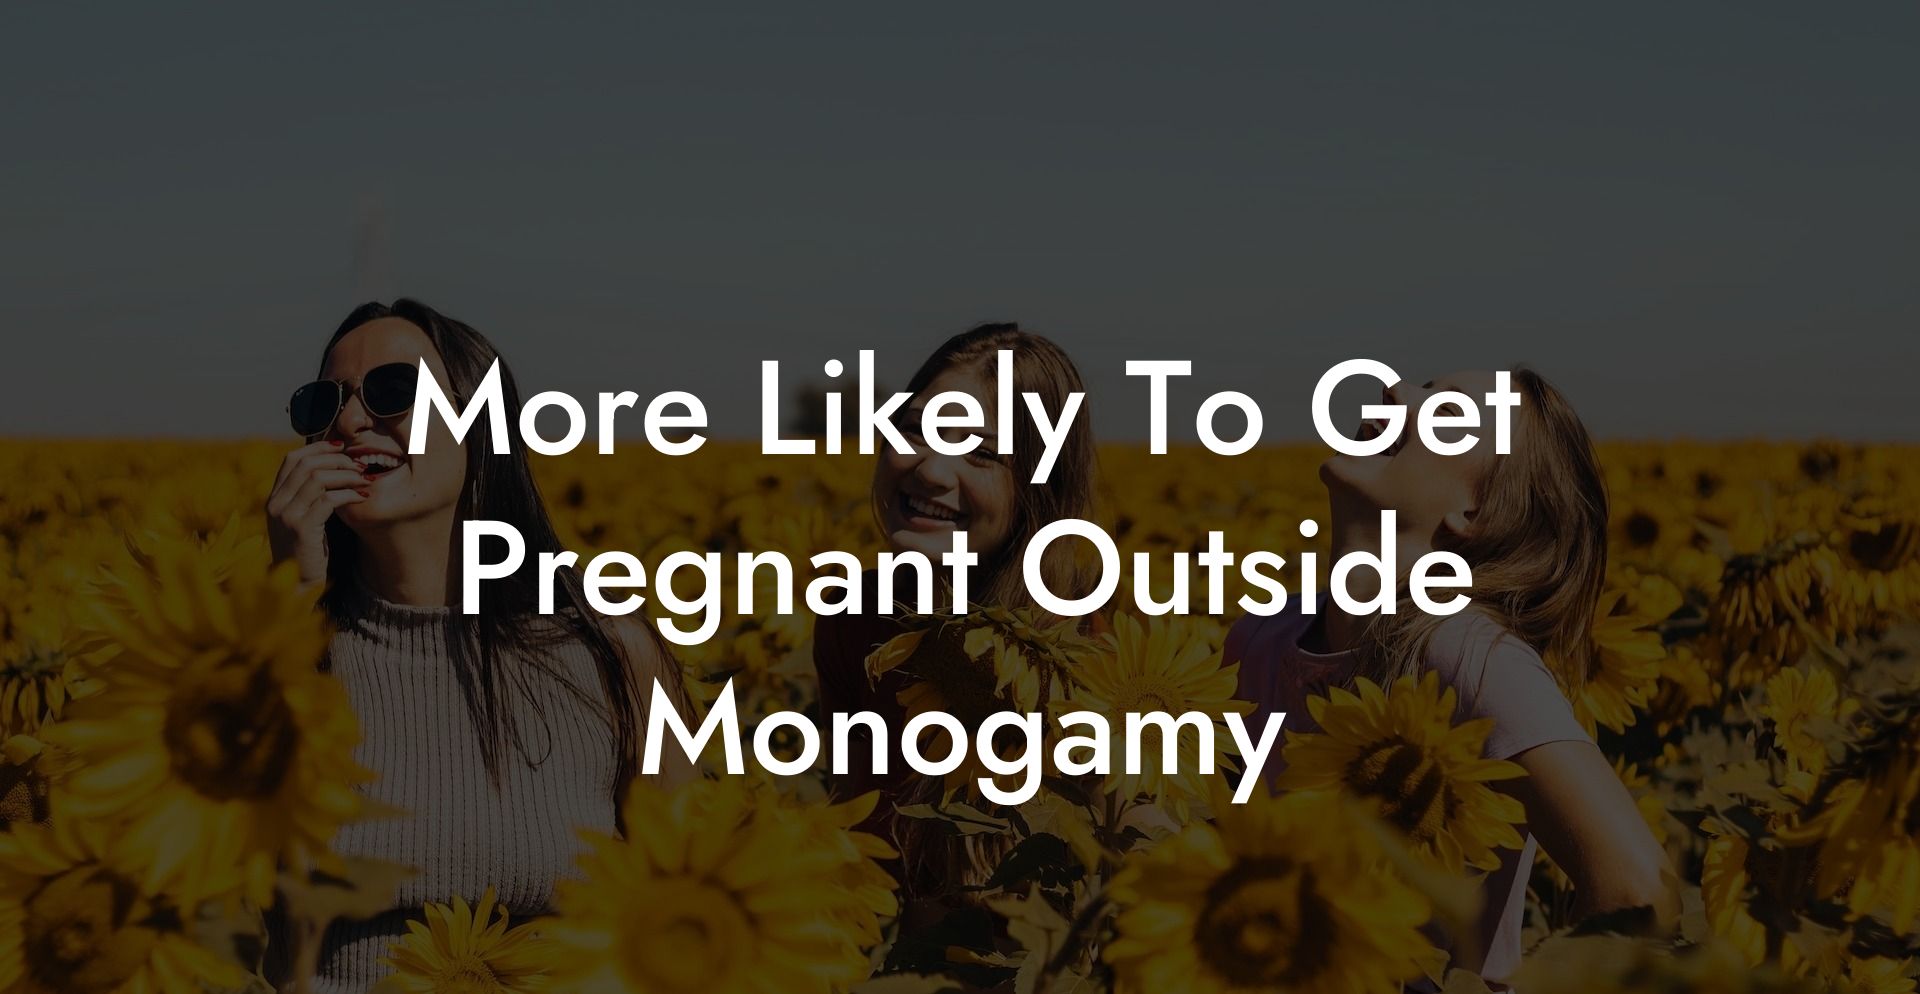 More Likely To Get Pregnant Outside Monogamy